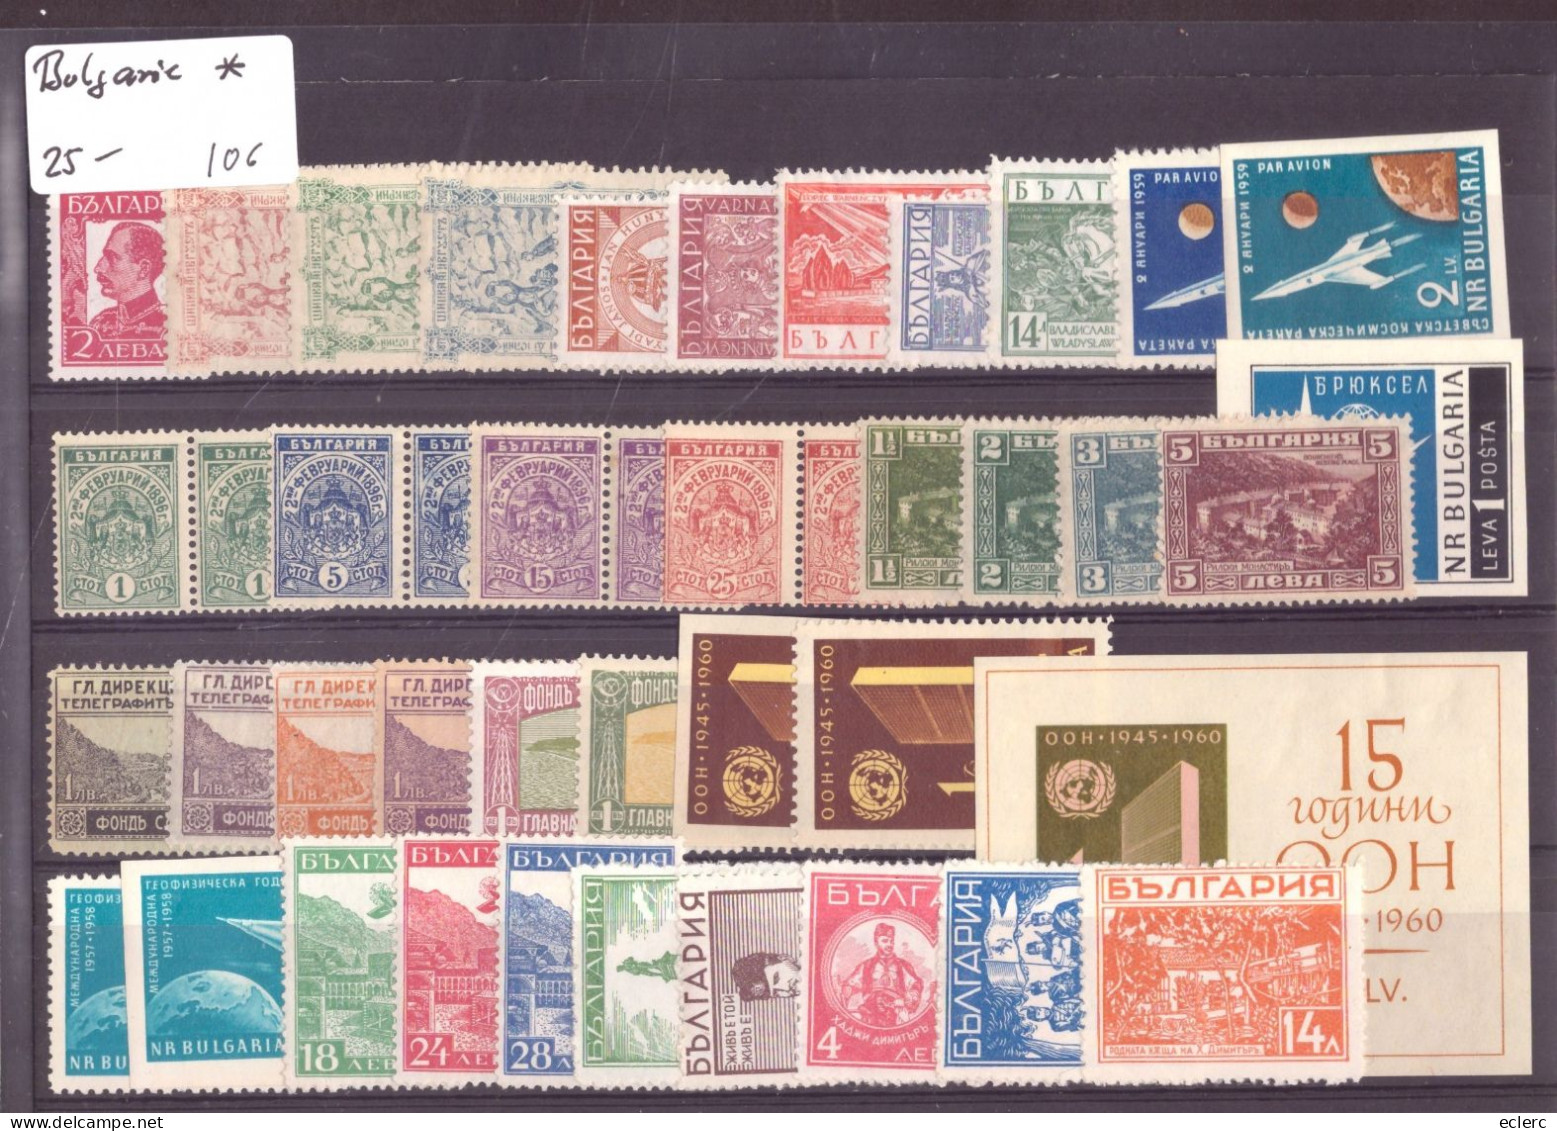 BULGARIE - LOT DE TIMBRES NEUFS * AVEC CHARNIERE - Collections, Lots & Series